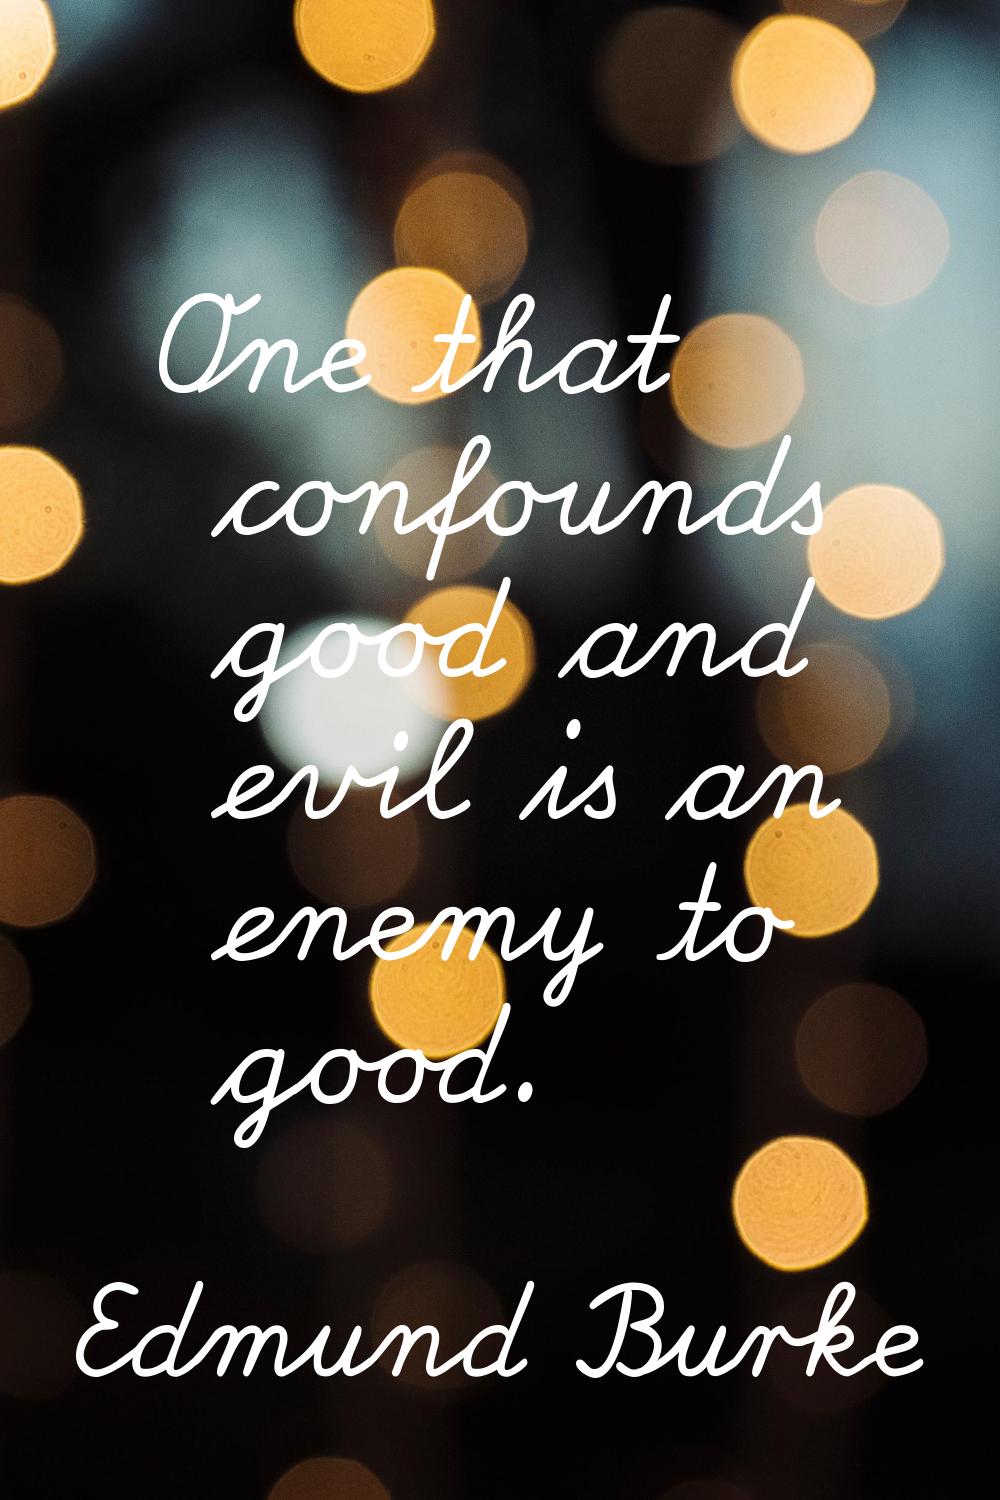 One that confounds good and evil is an enemy to good.